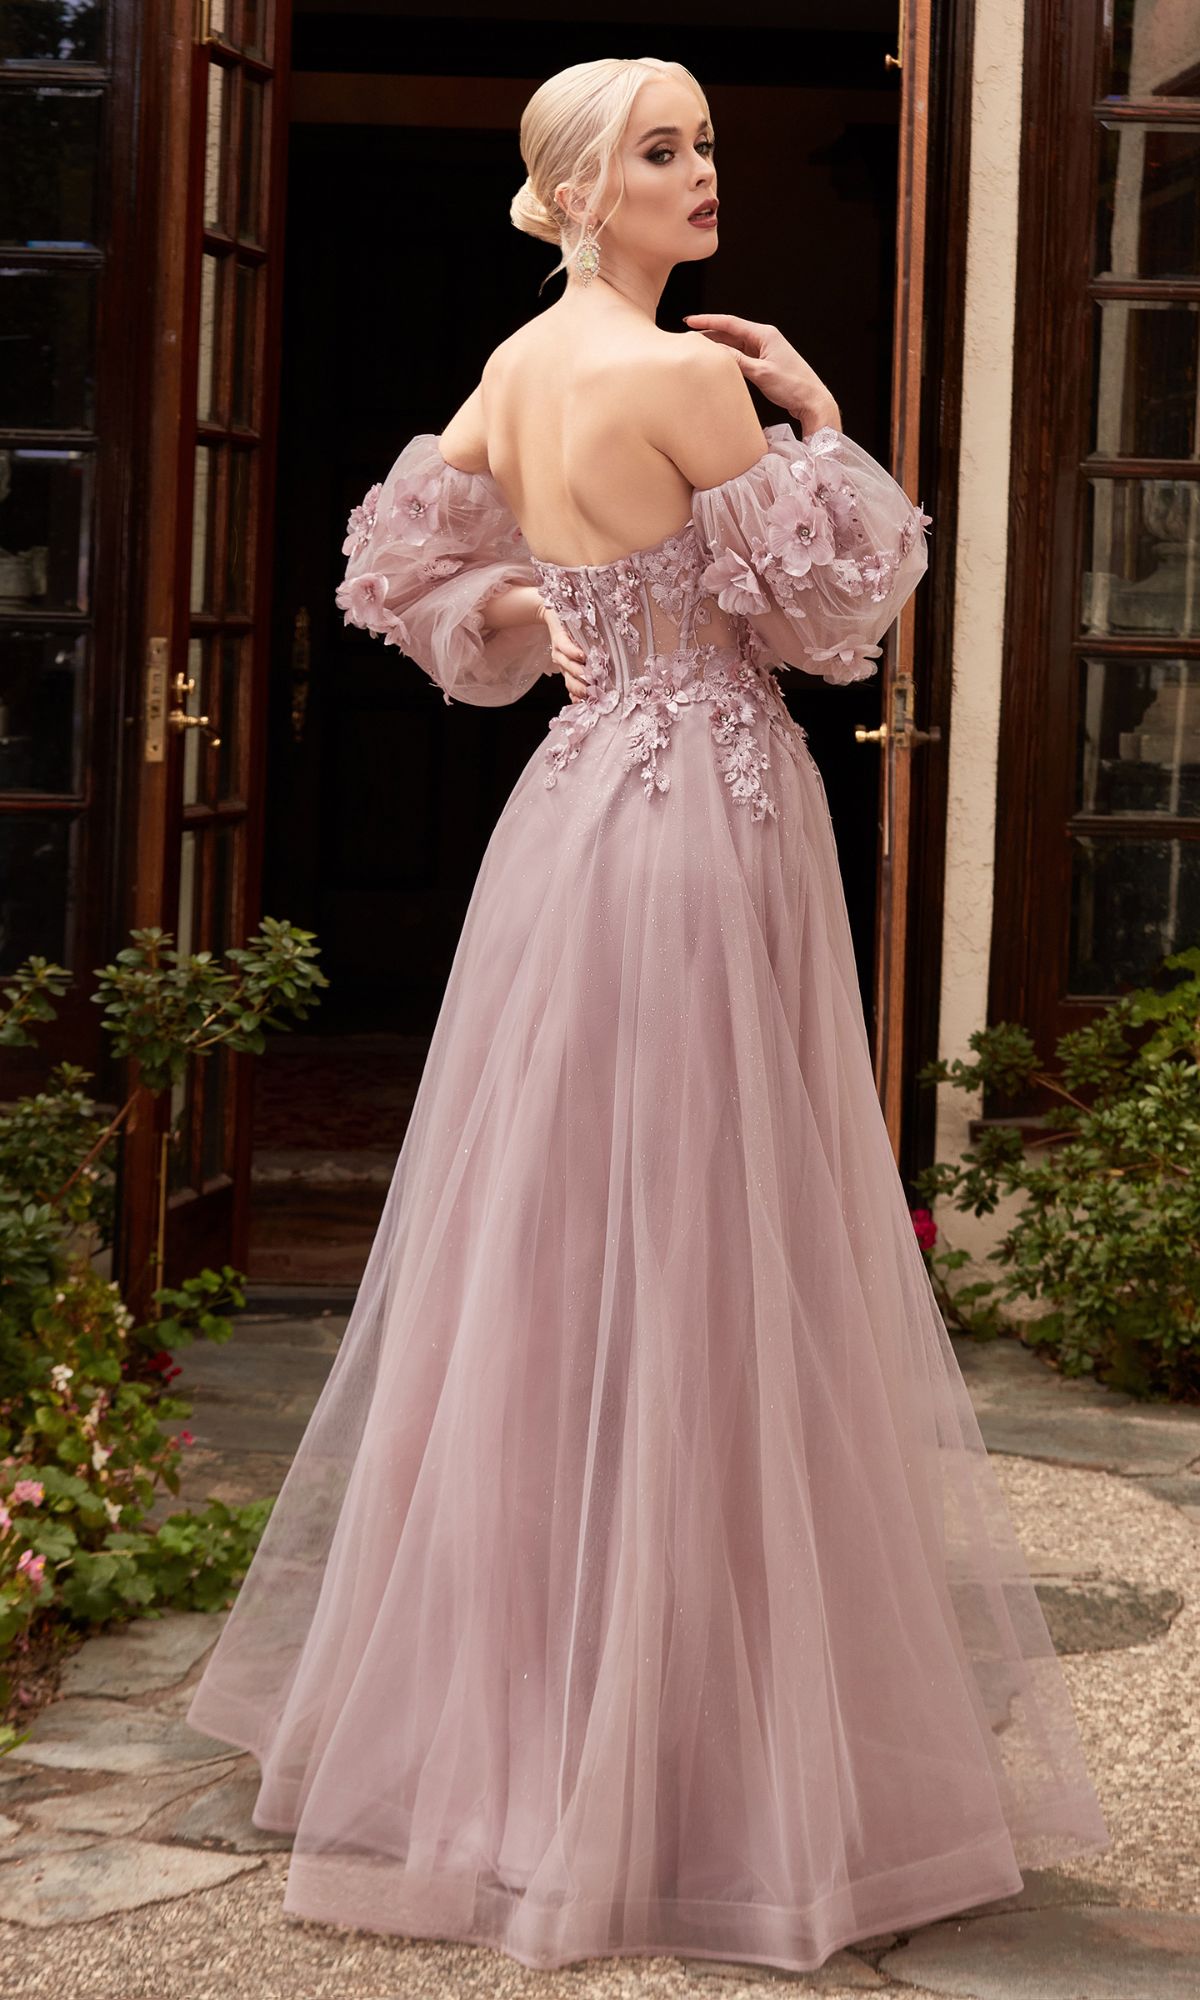 Puff-Sleeved Long Strapless Prom Ball Gown CD962